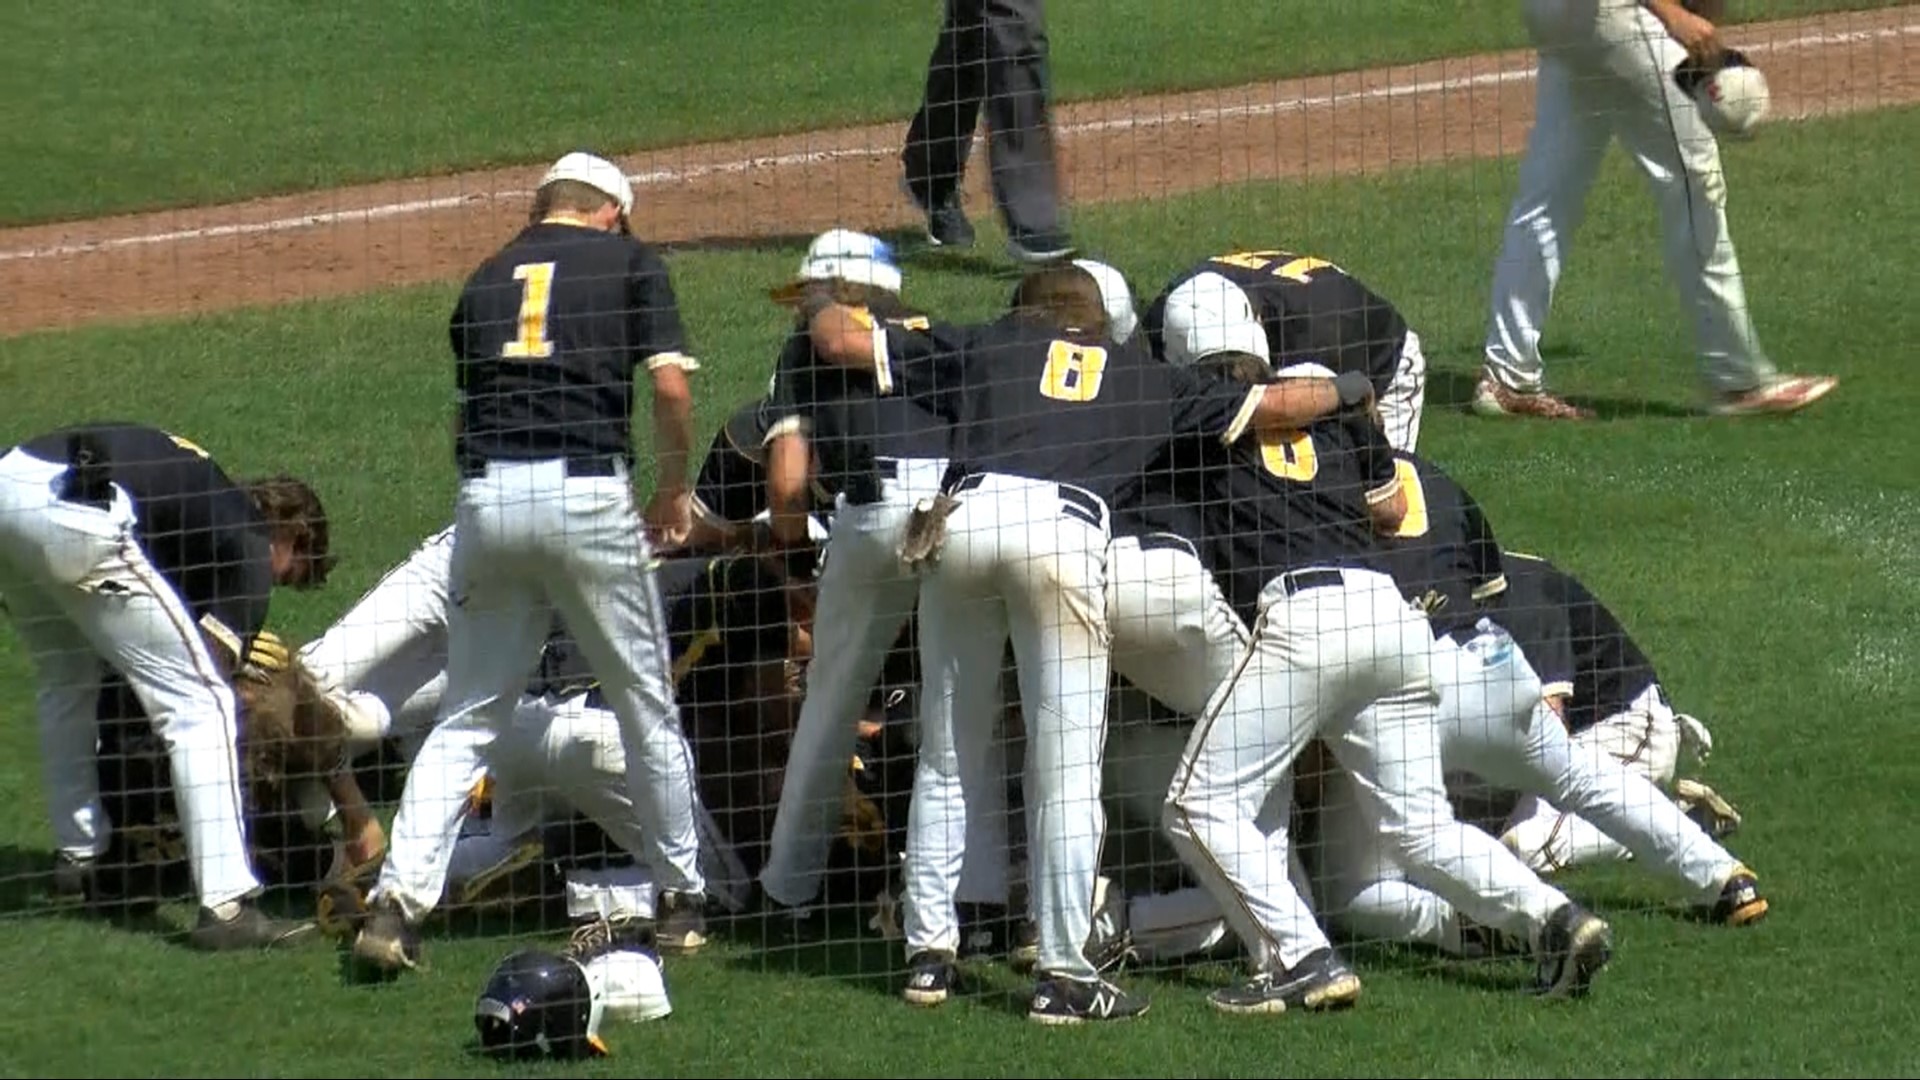 Northview won on a walk-off wild pitch in the seventh inning to punch their ticket to Saturday's state title game in Akron.